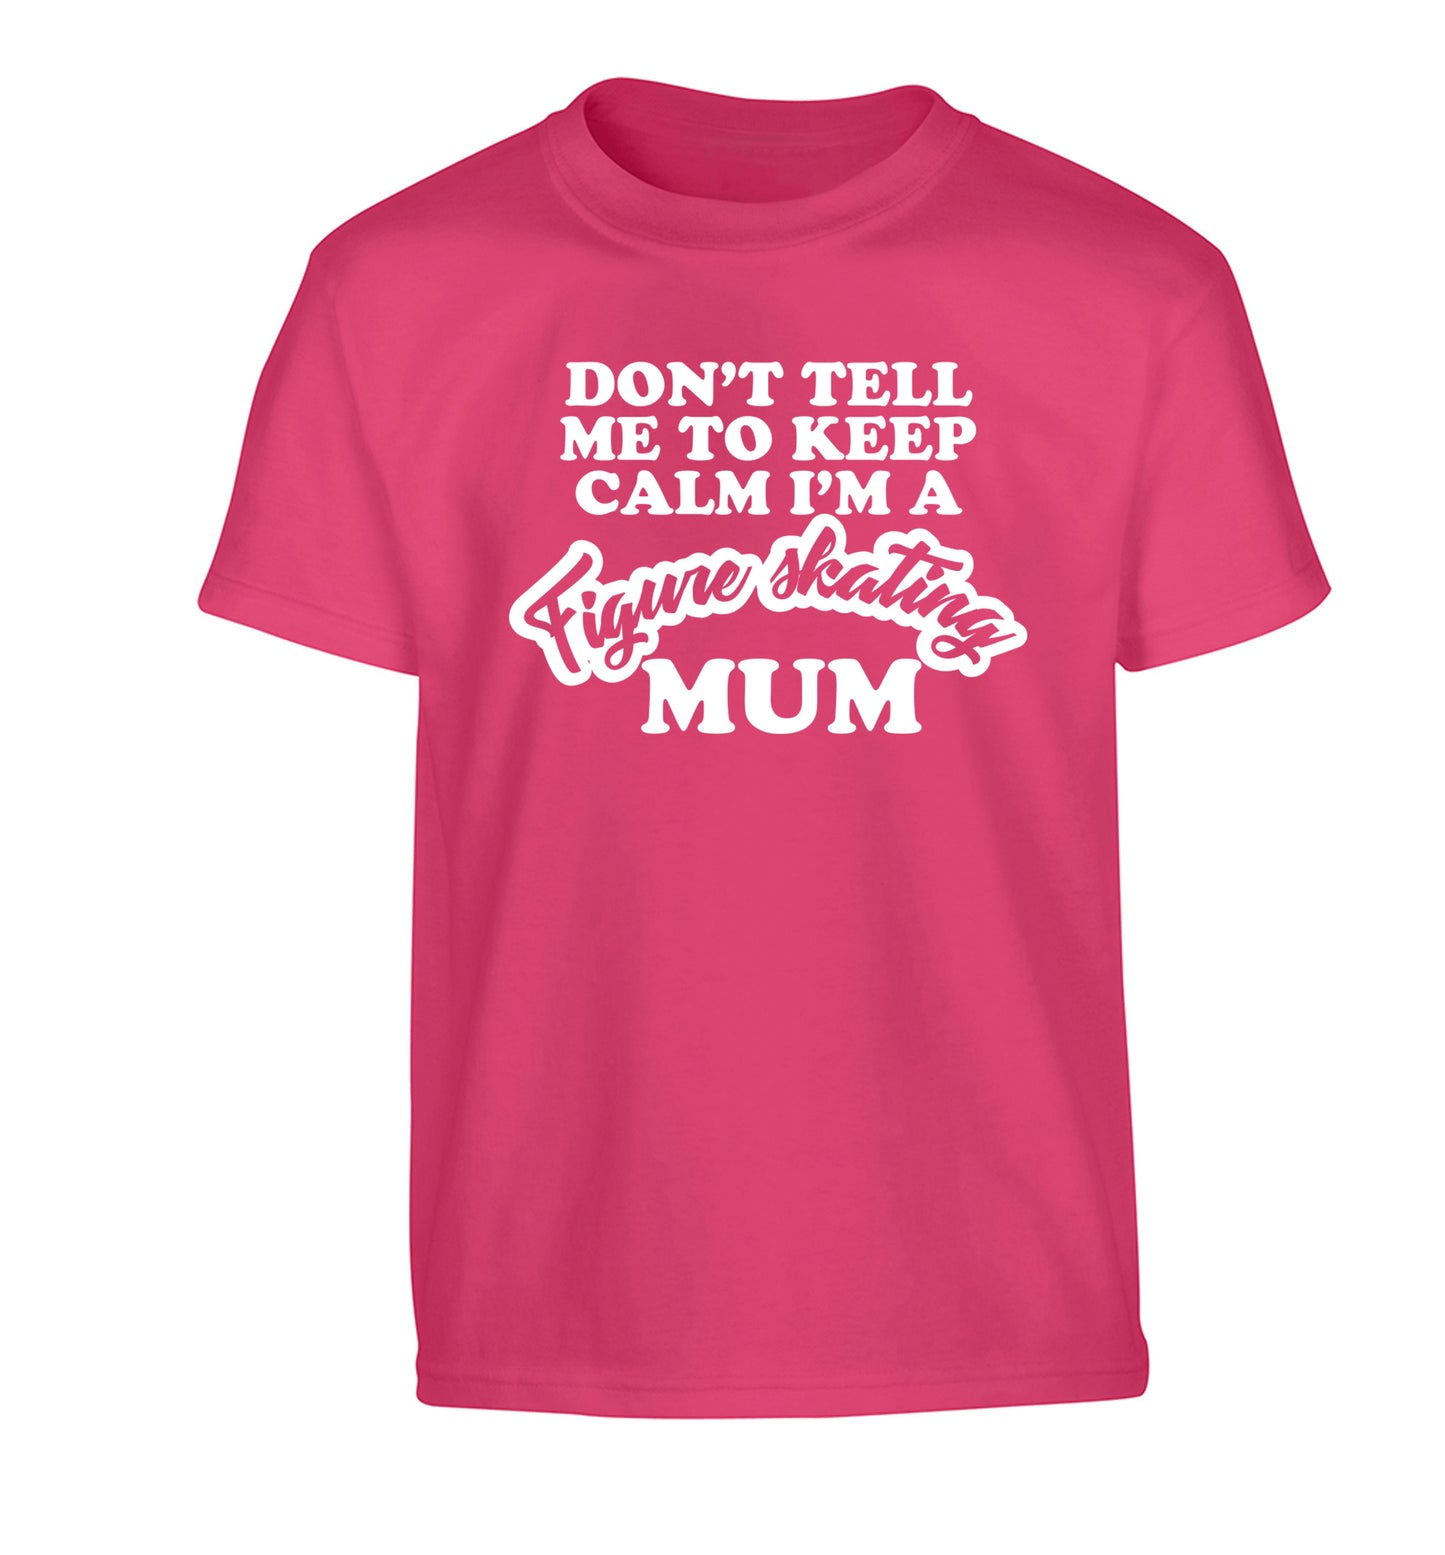 Don't tell me to keep calm I'm a figure skating mum Children's pink Tshirt 12-14 Years